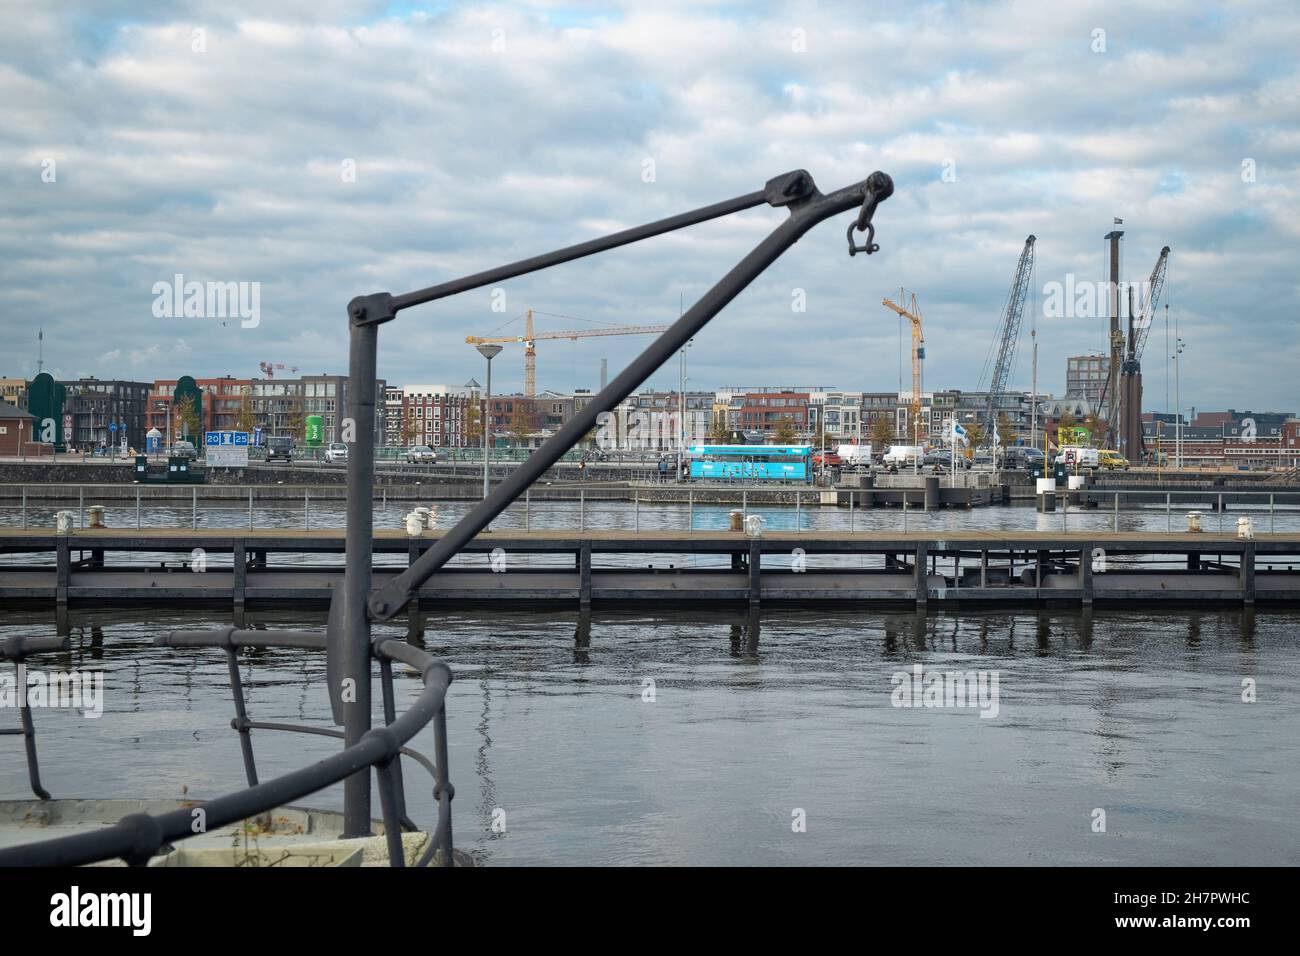 Building cranes in the Houthavens, a new residential area of Amsterdam with an old crane mounted on a converted barge in the foreground. Stock Photo